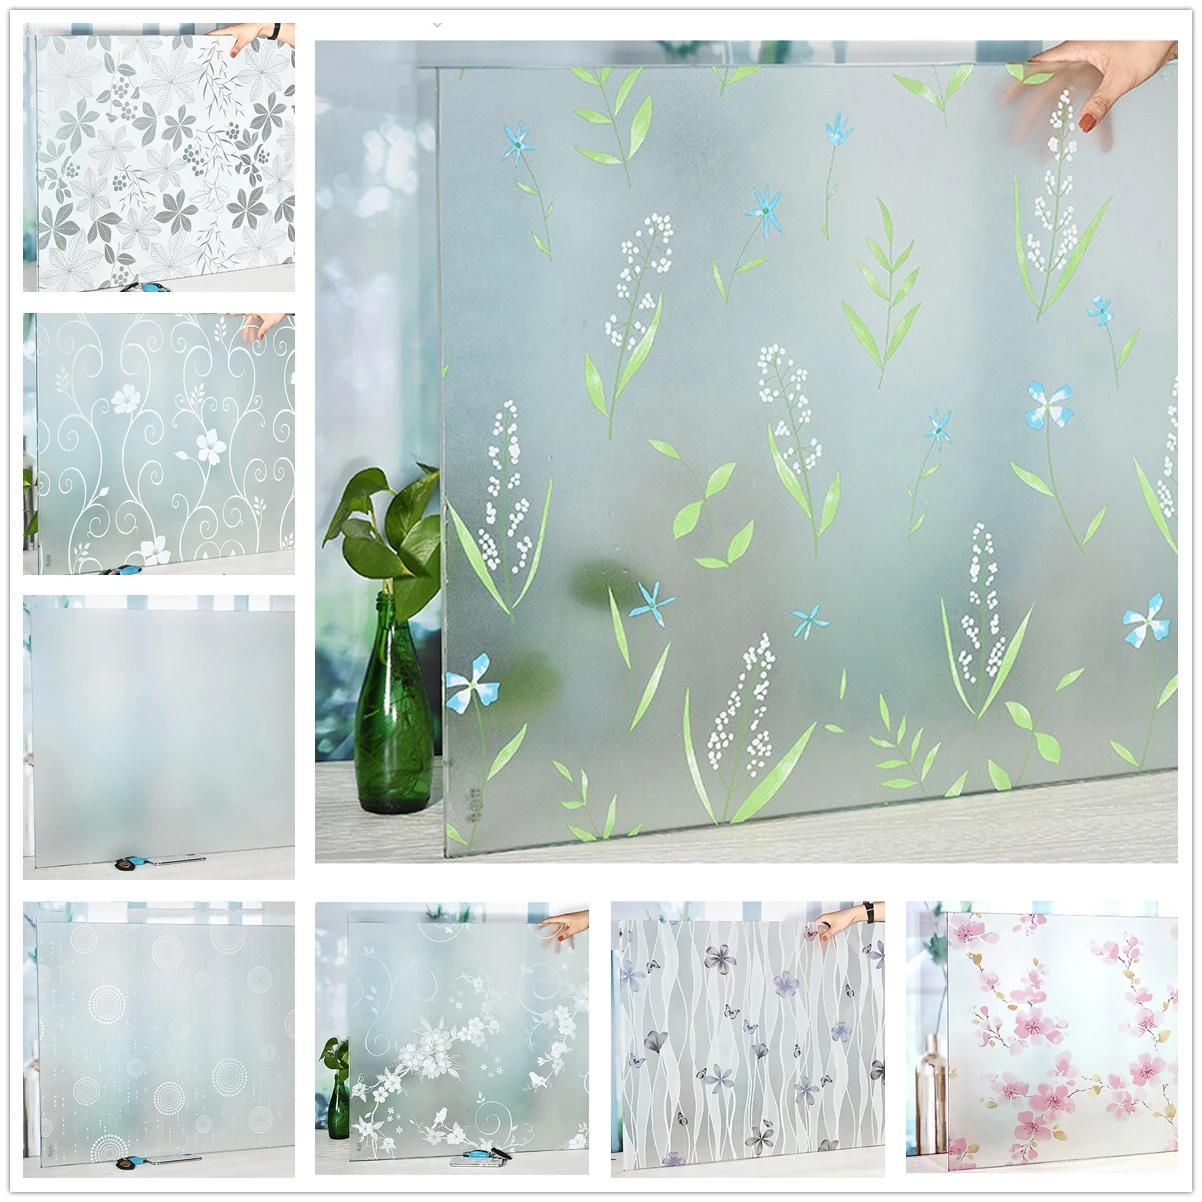 

Window Privacy Film Frosted Glass Self Adhesive Opaque Vinyl Decorative Stickers UV Blocking Heat Control Covering for Home